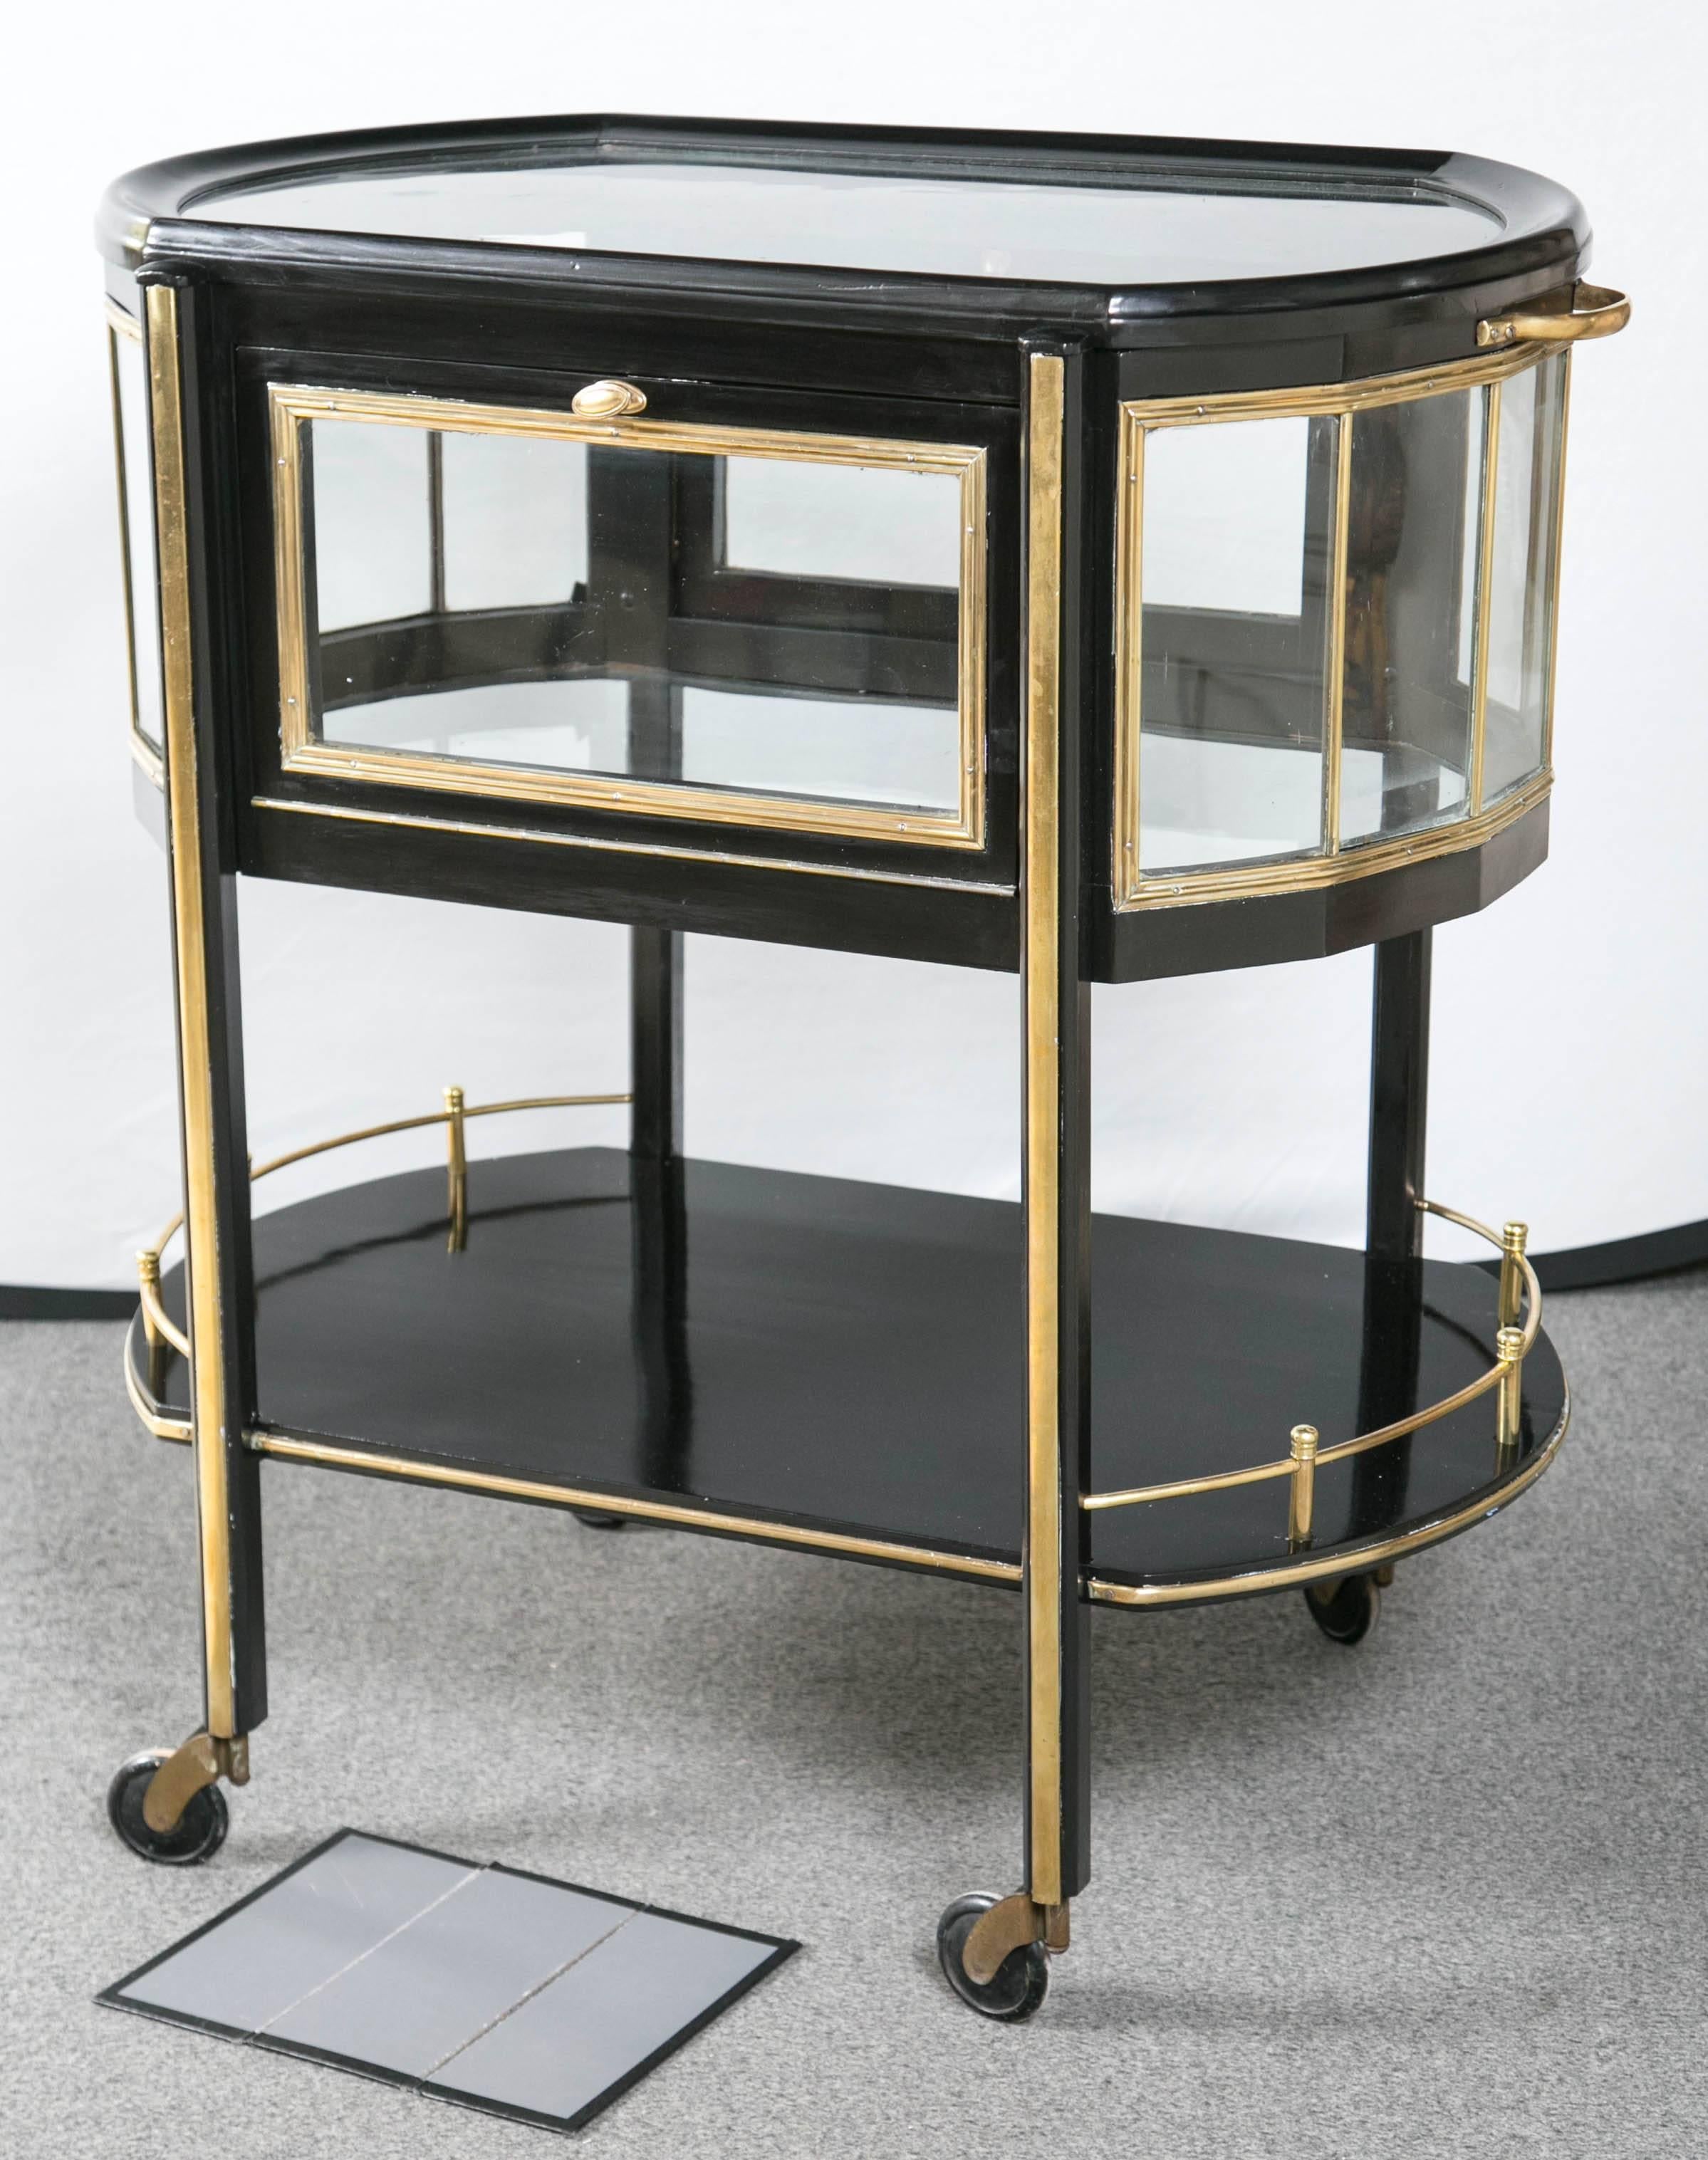 A German lacquered brass and mahogany ebonized drinks trolley by Ernst Rockhausen, second quarter of the 20th century. This ebonized tea cart or rolling trolley is absolutely breathtaking. The casters allow the whole to roll effortlessly around